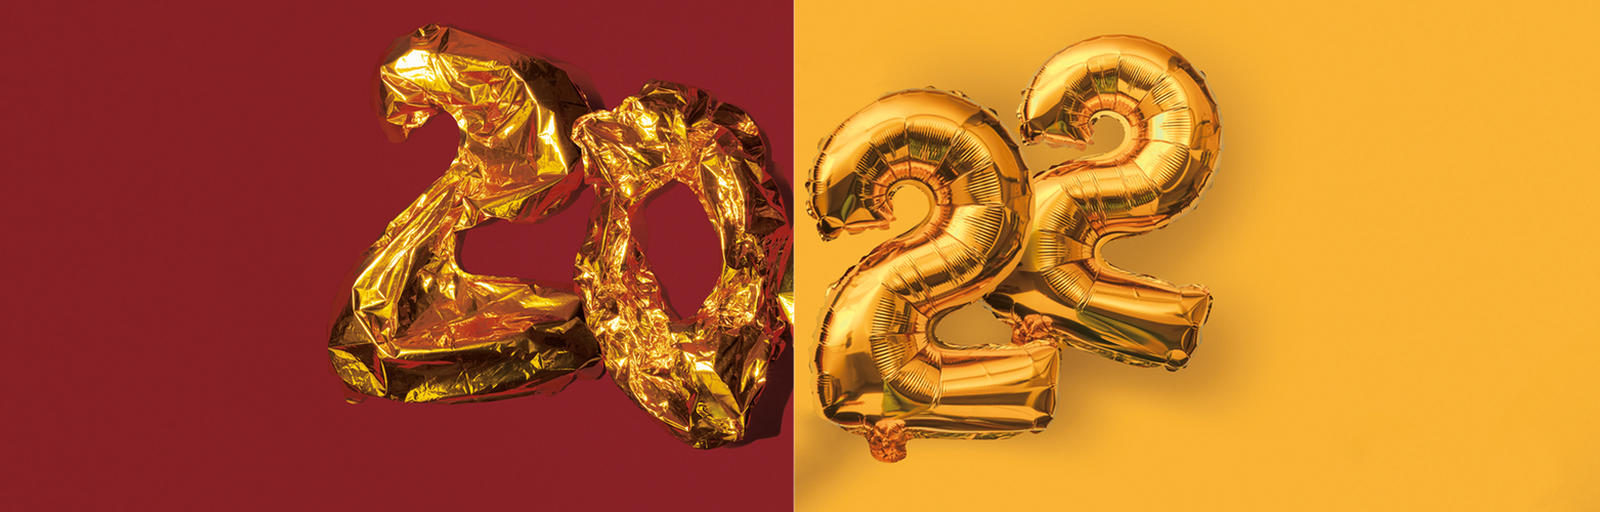 Deflated balloons of a 2 and 0 next to inflated balloons of 2 and 2 to spell out 2022